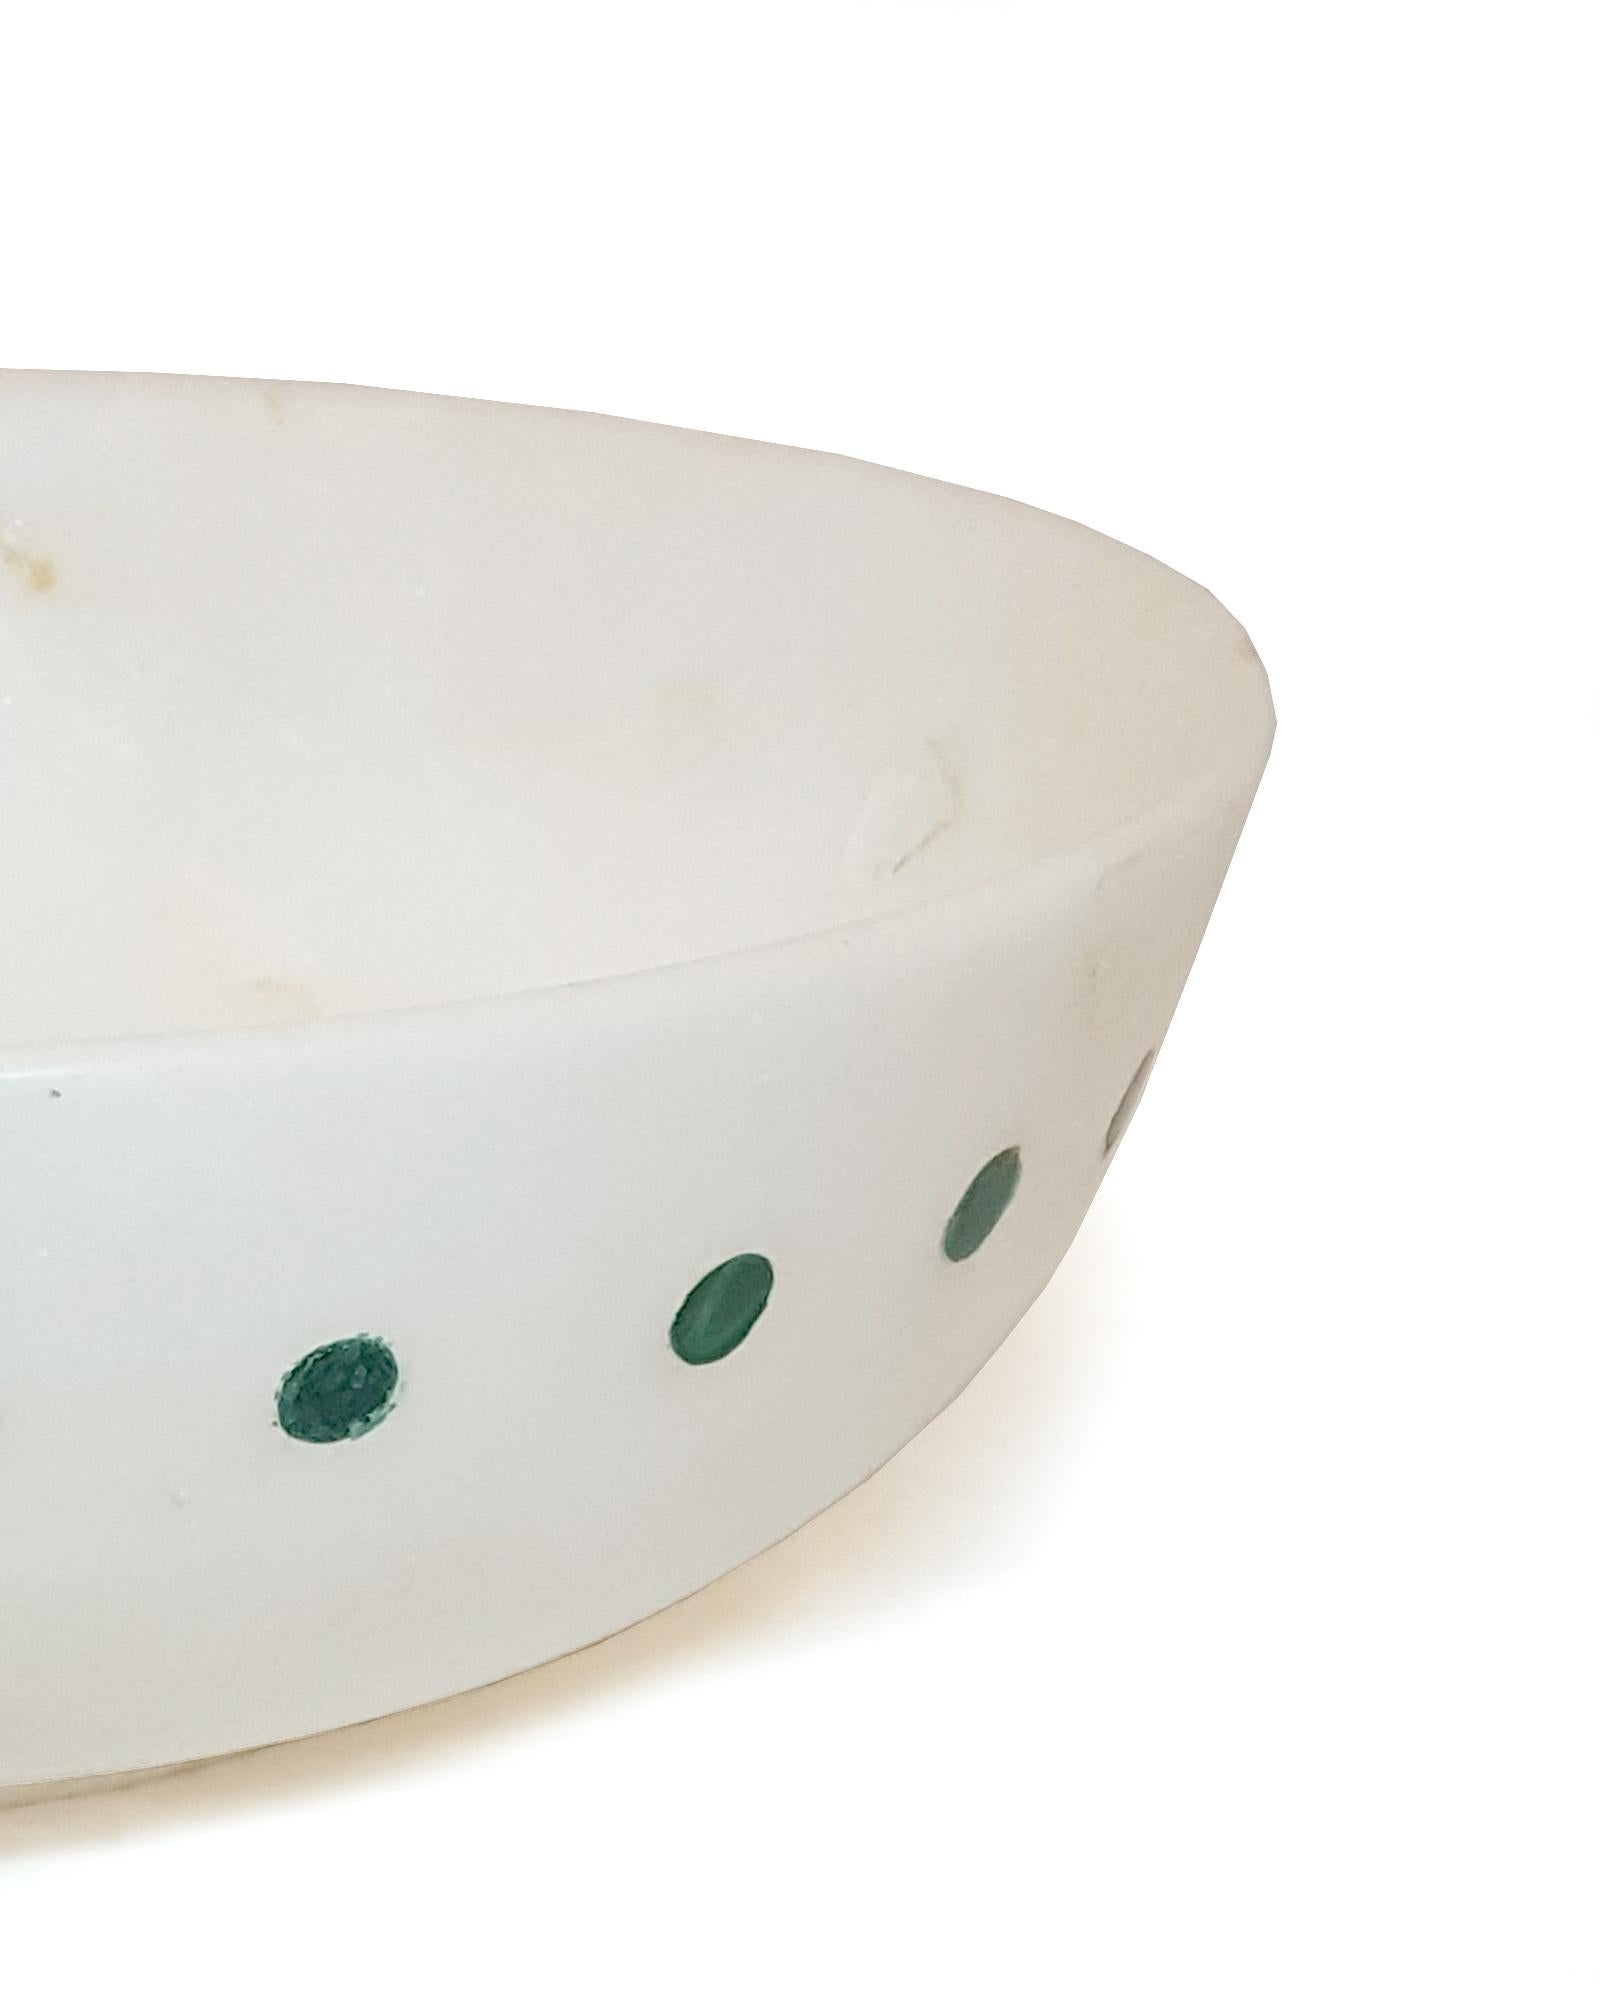 Spotted Bowl in White Marble inlayed with Malachite.


Spotted Bowl
Size-  9.5” x 9.5” x 3.5” H.
Materials - White Marble, Malachite, Hand-Carved


Buyer Cancellation-
The cancellation charge is 25% which increases to 50% if the  production is